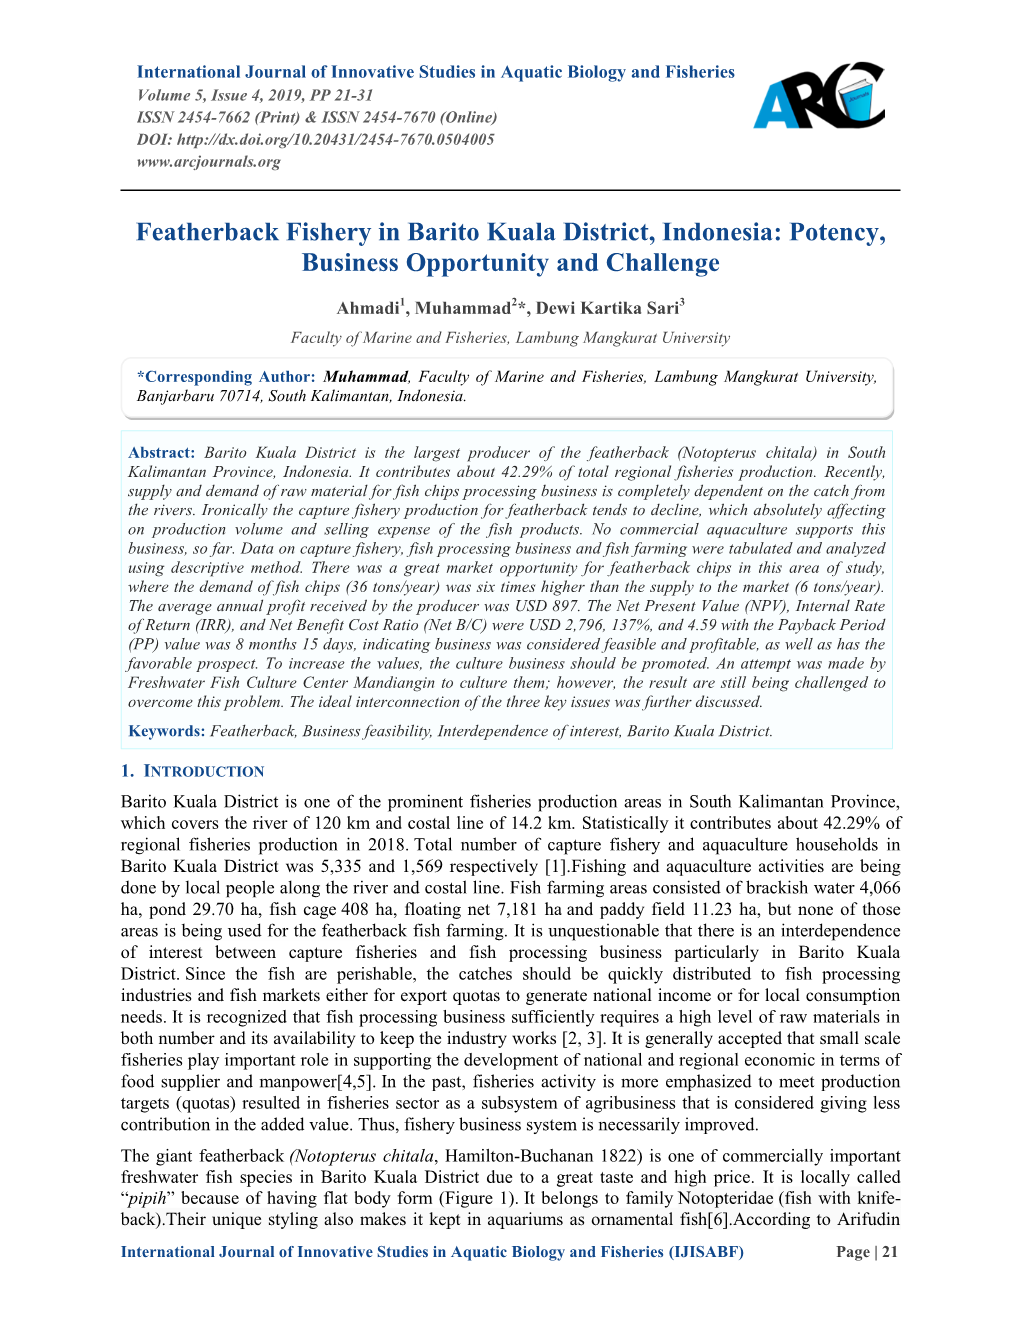 Featherback Fishery in Barito Kuala District, Indonesia: Potency, Business Opportunity and Challenge